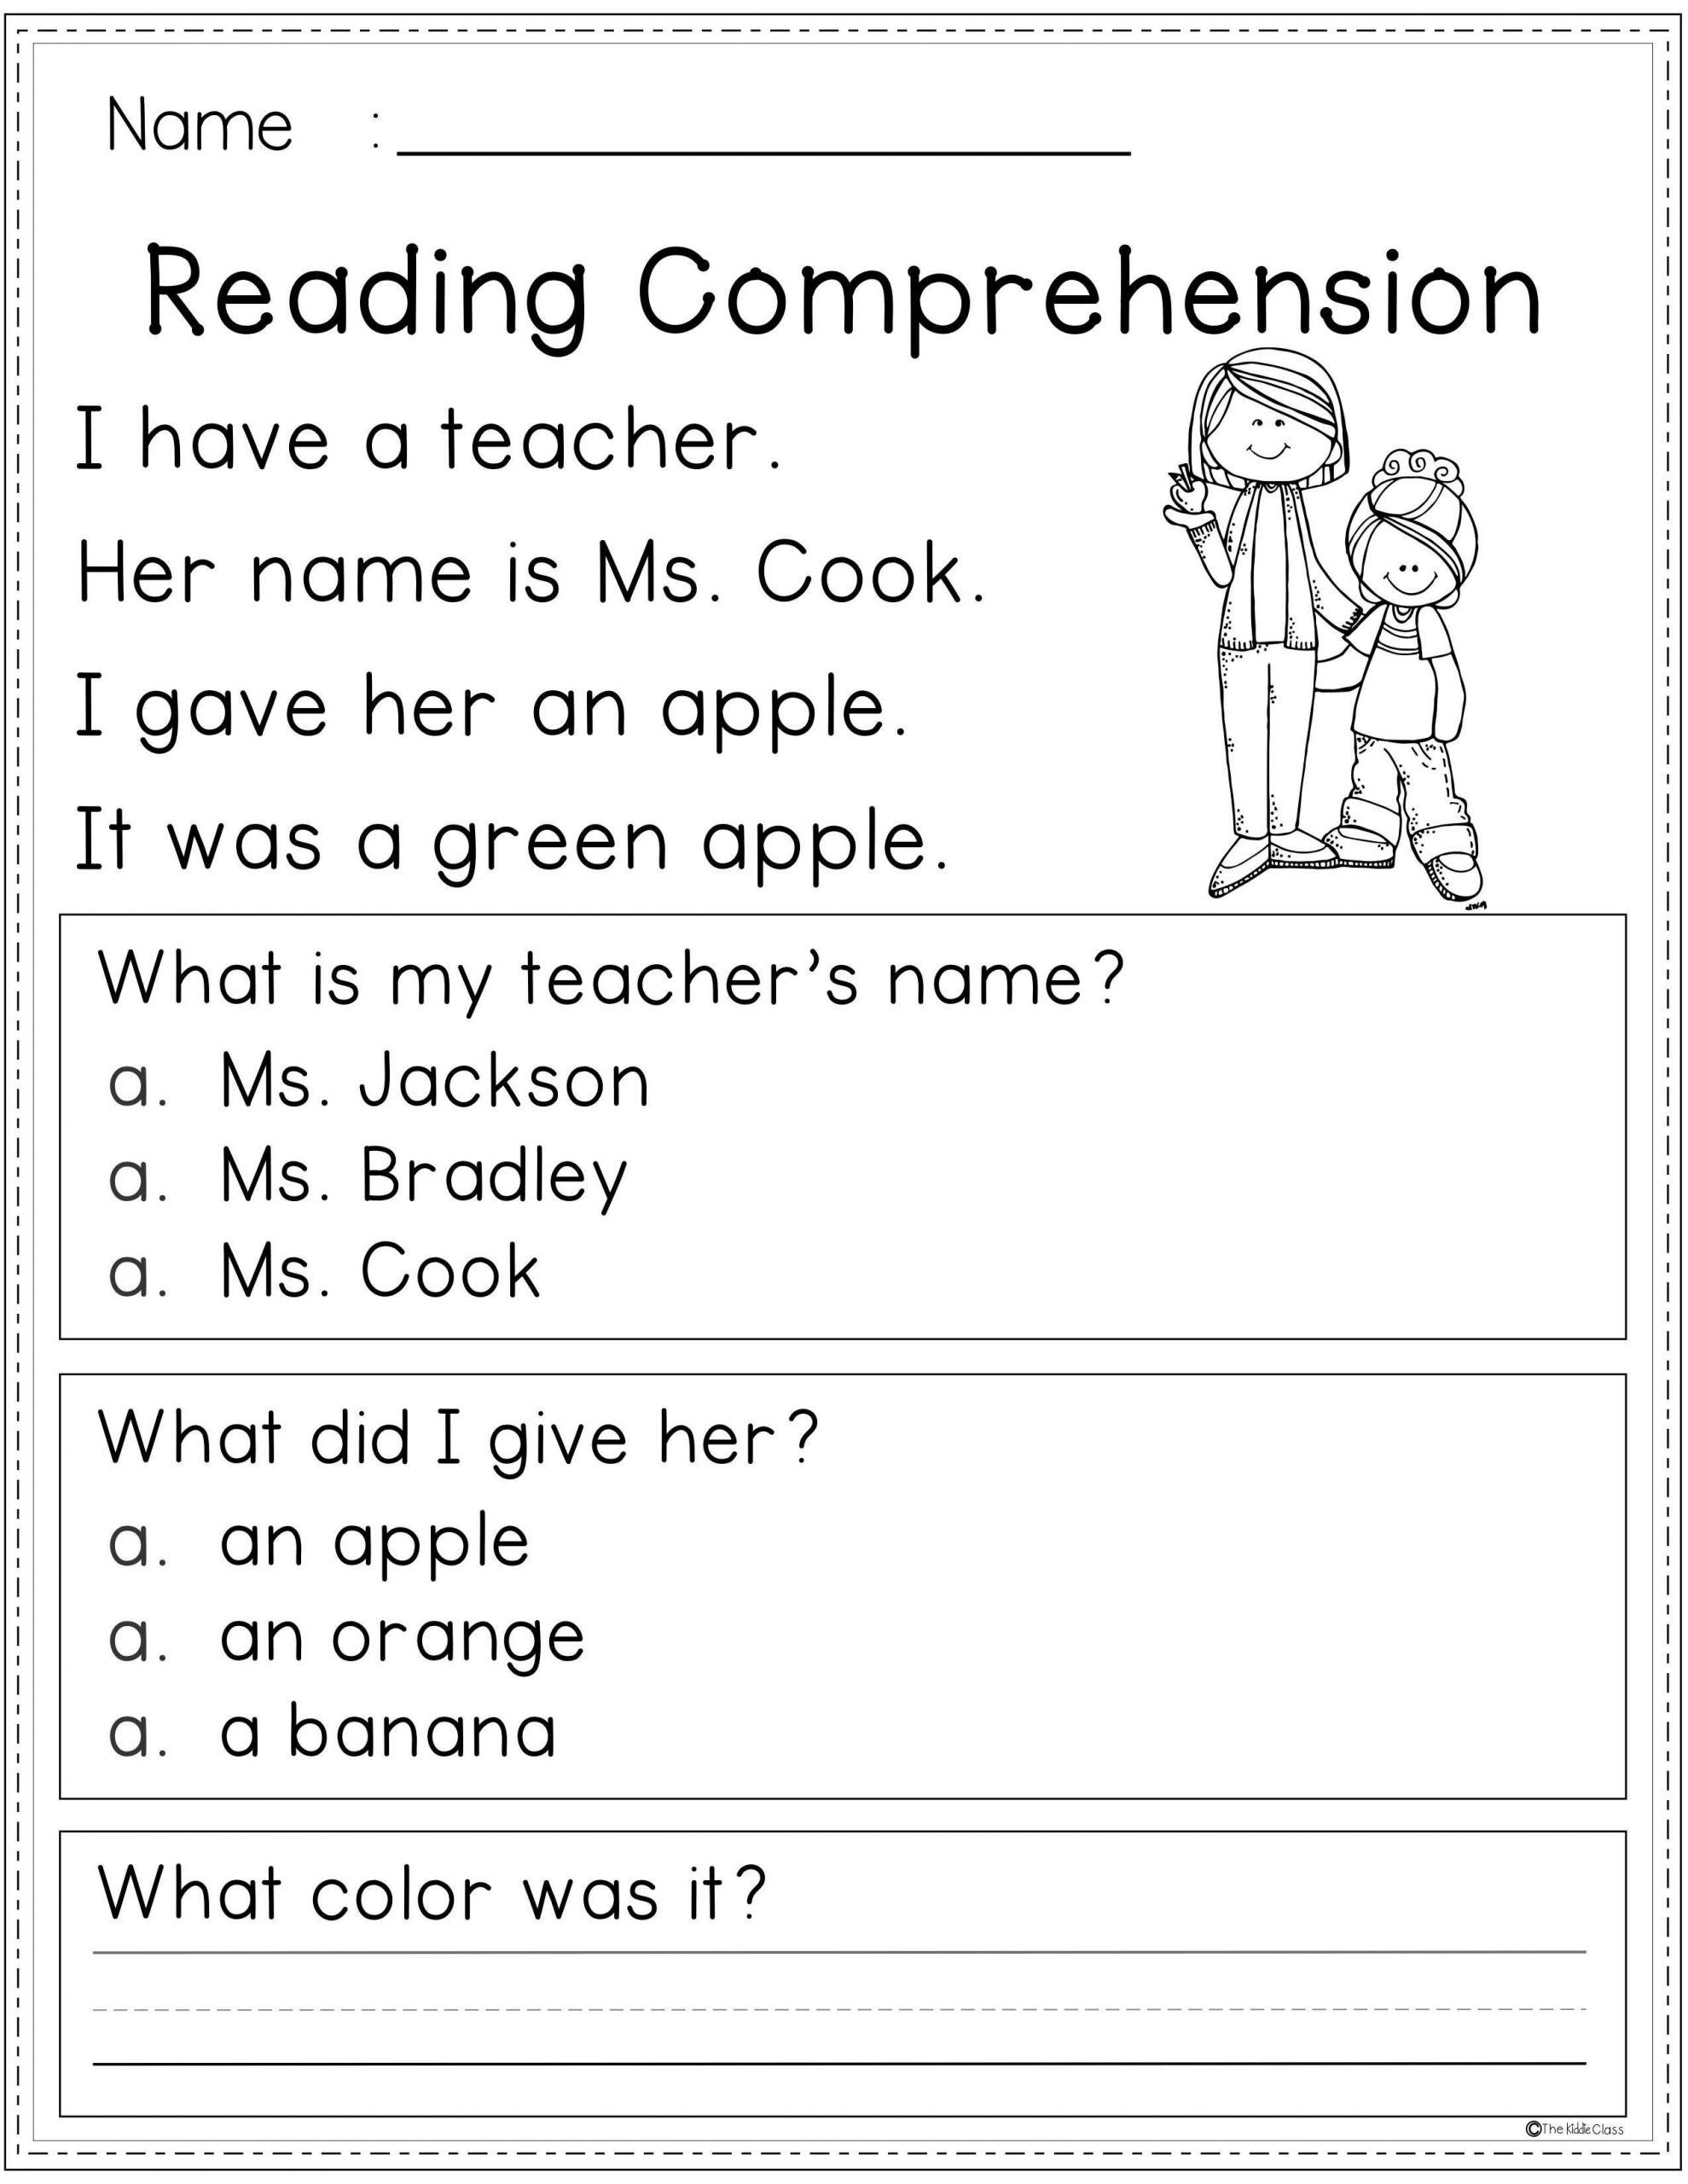 reading-comprehension-for-adults-free-worksheets-reading